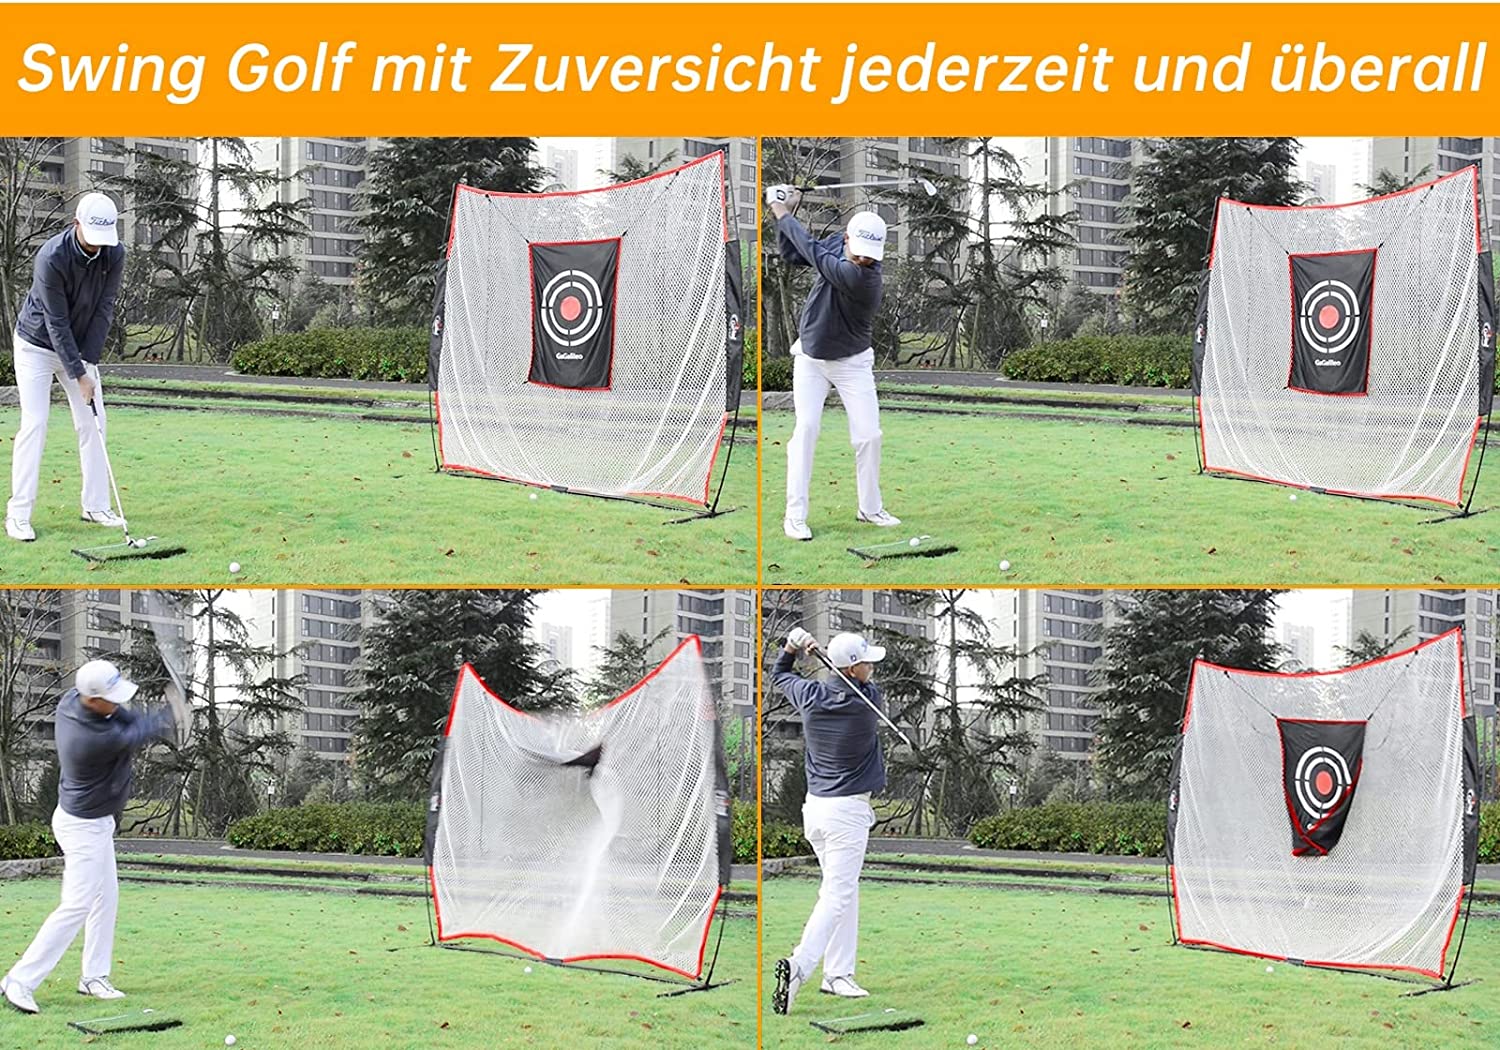 Golf Net, Golf Practice Net, Indoor and Outdoor Golf Training Aid with Target and Carry Bag